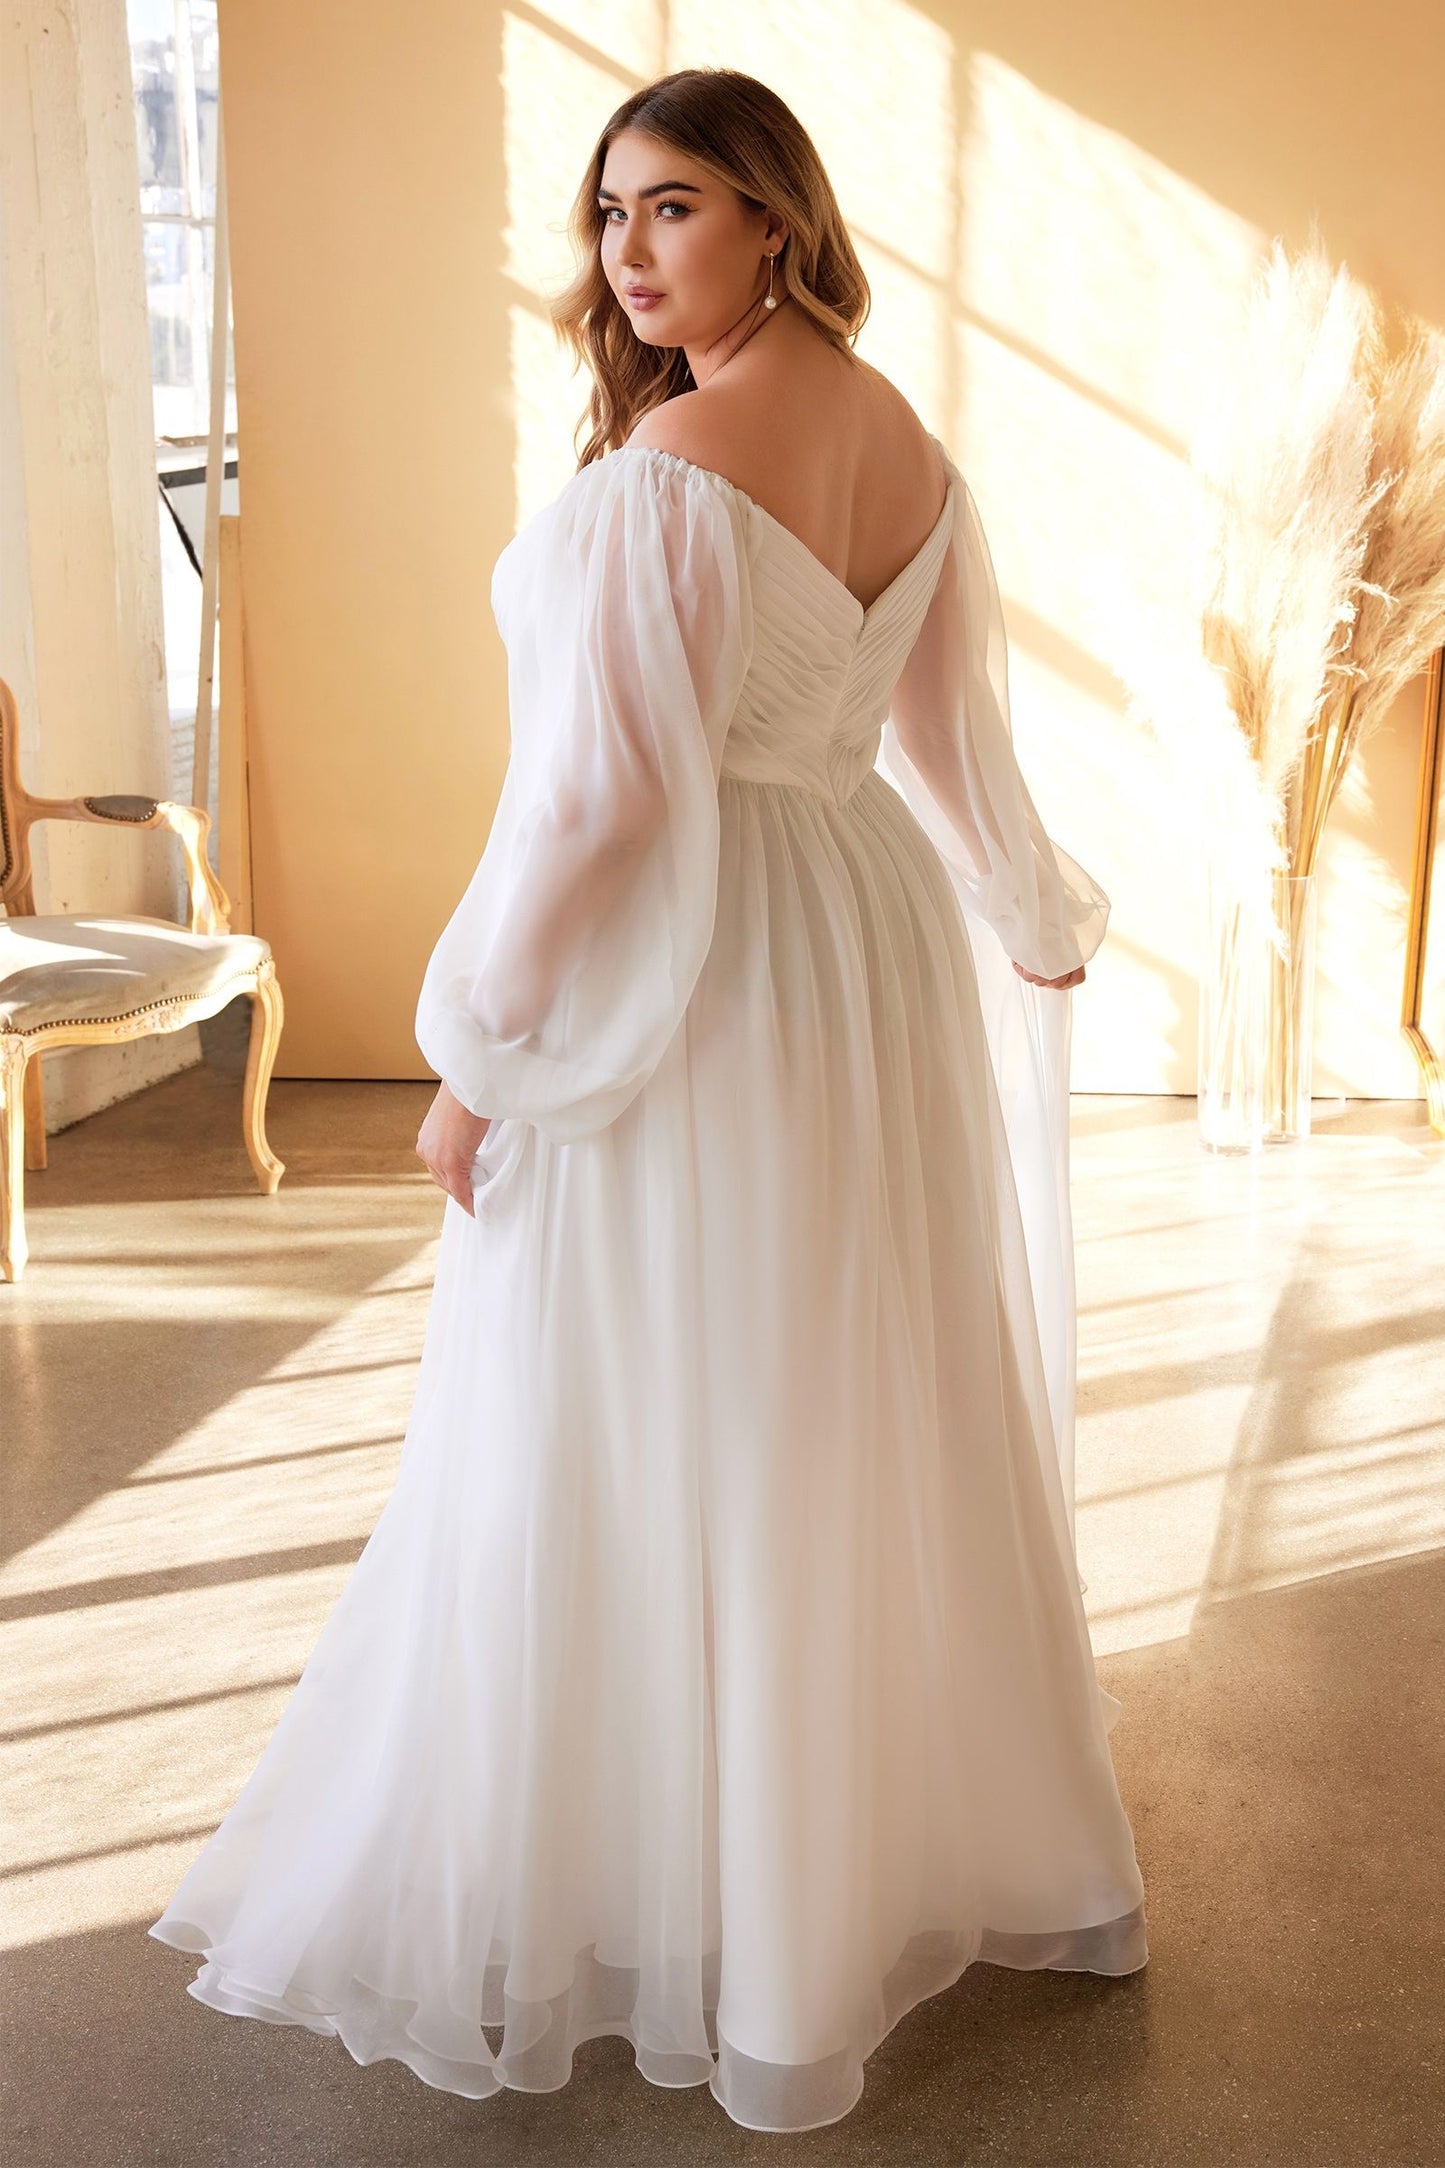 Enchanting diaphanous gown with sweetheart neckline and frothy A-line skirt